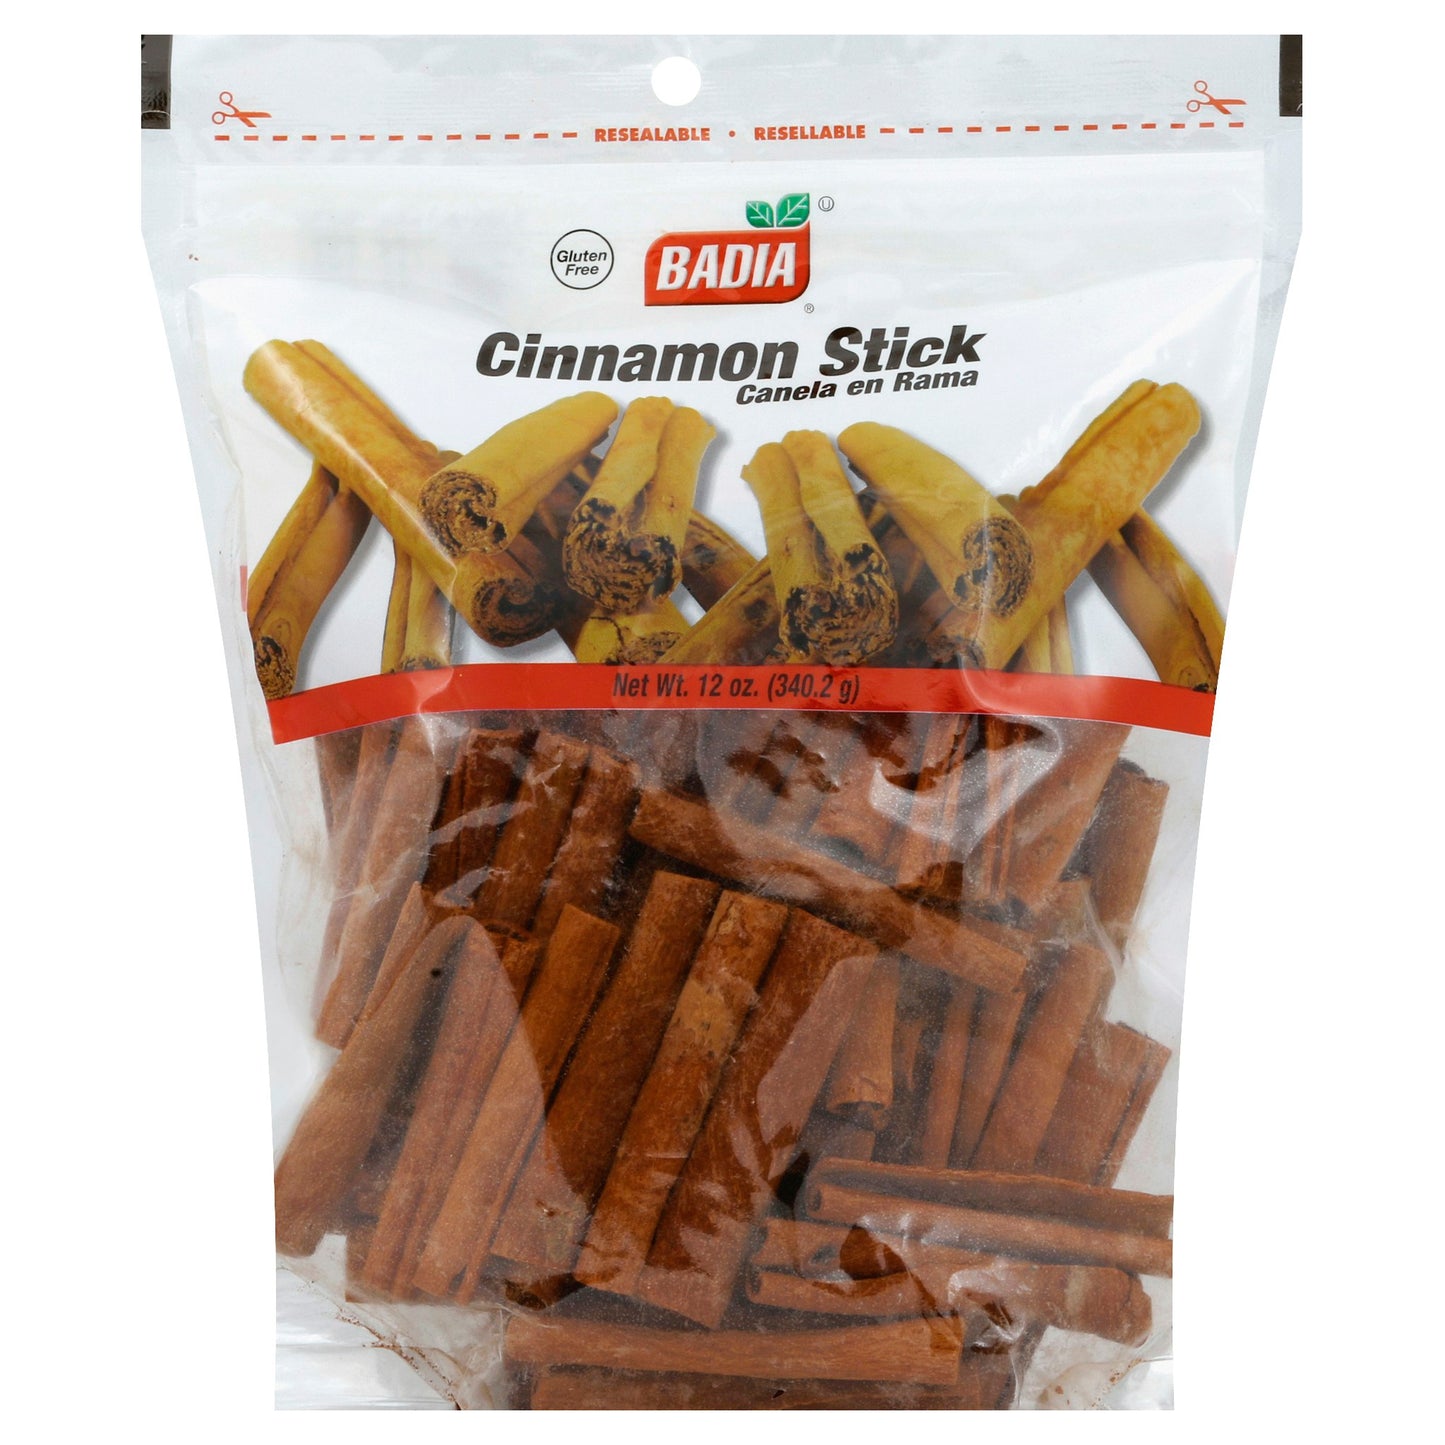 Badia Cinnamon Stick with Zipper - 12 Ounce Bag (Pack of 6)